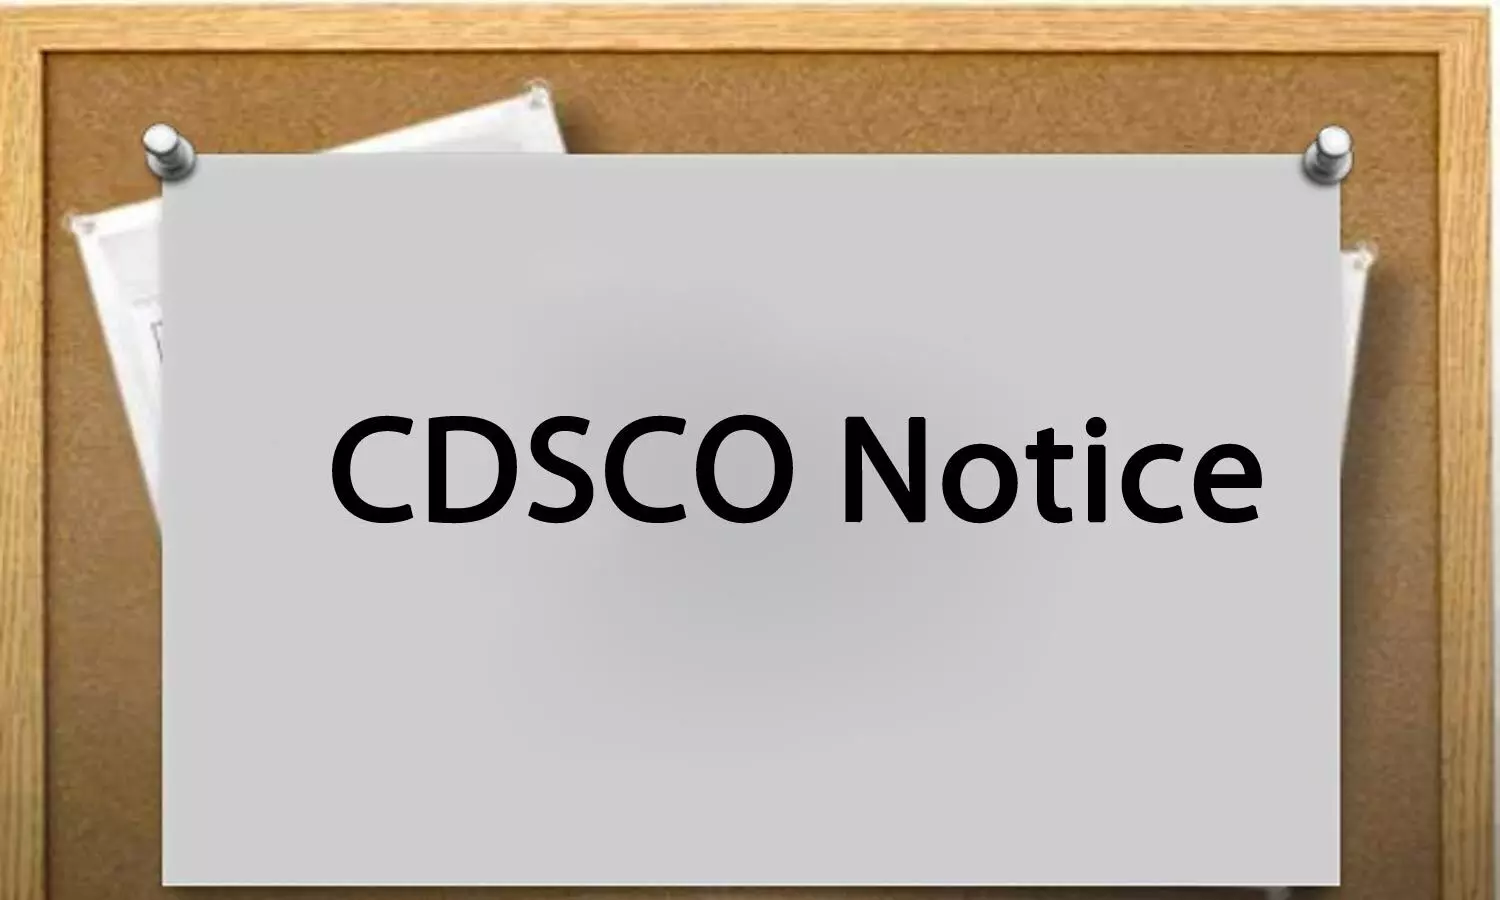 Issuance of Registration Certificate, Import License for Veterinary Vaccines: CDSCO asks SLAs for e-submission of applications